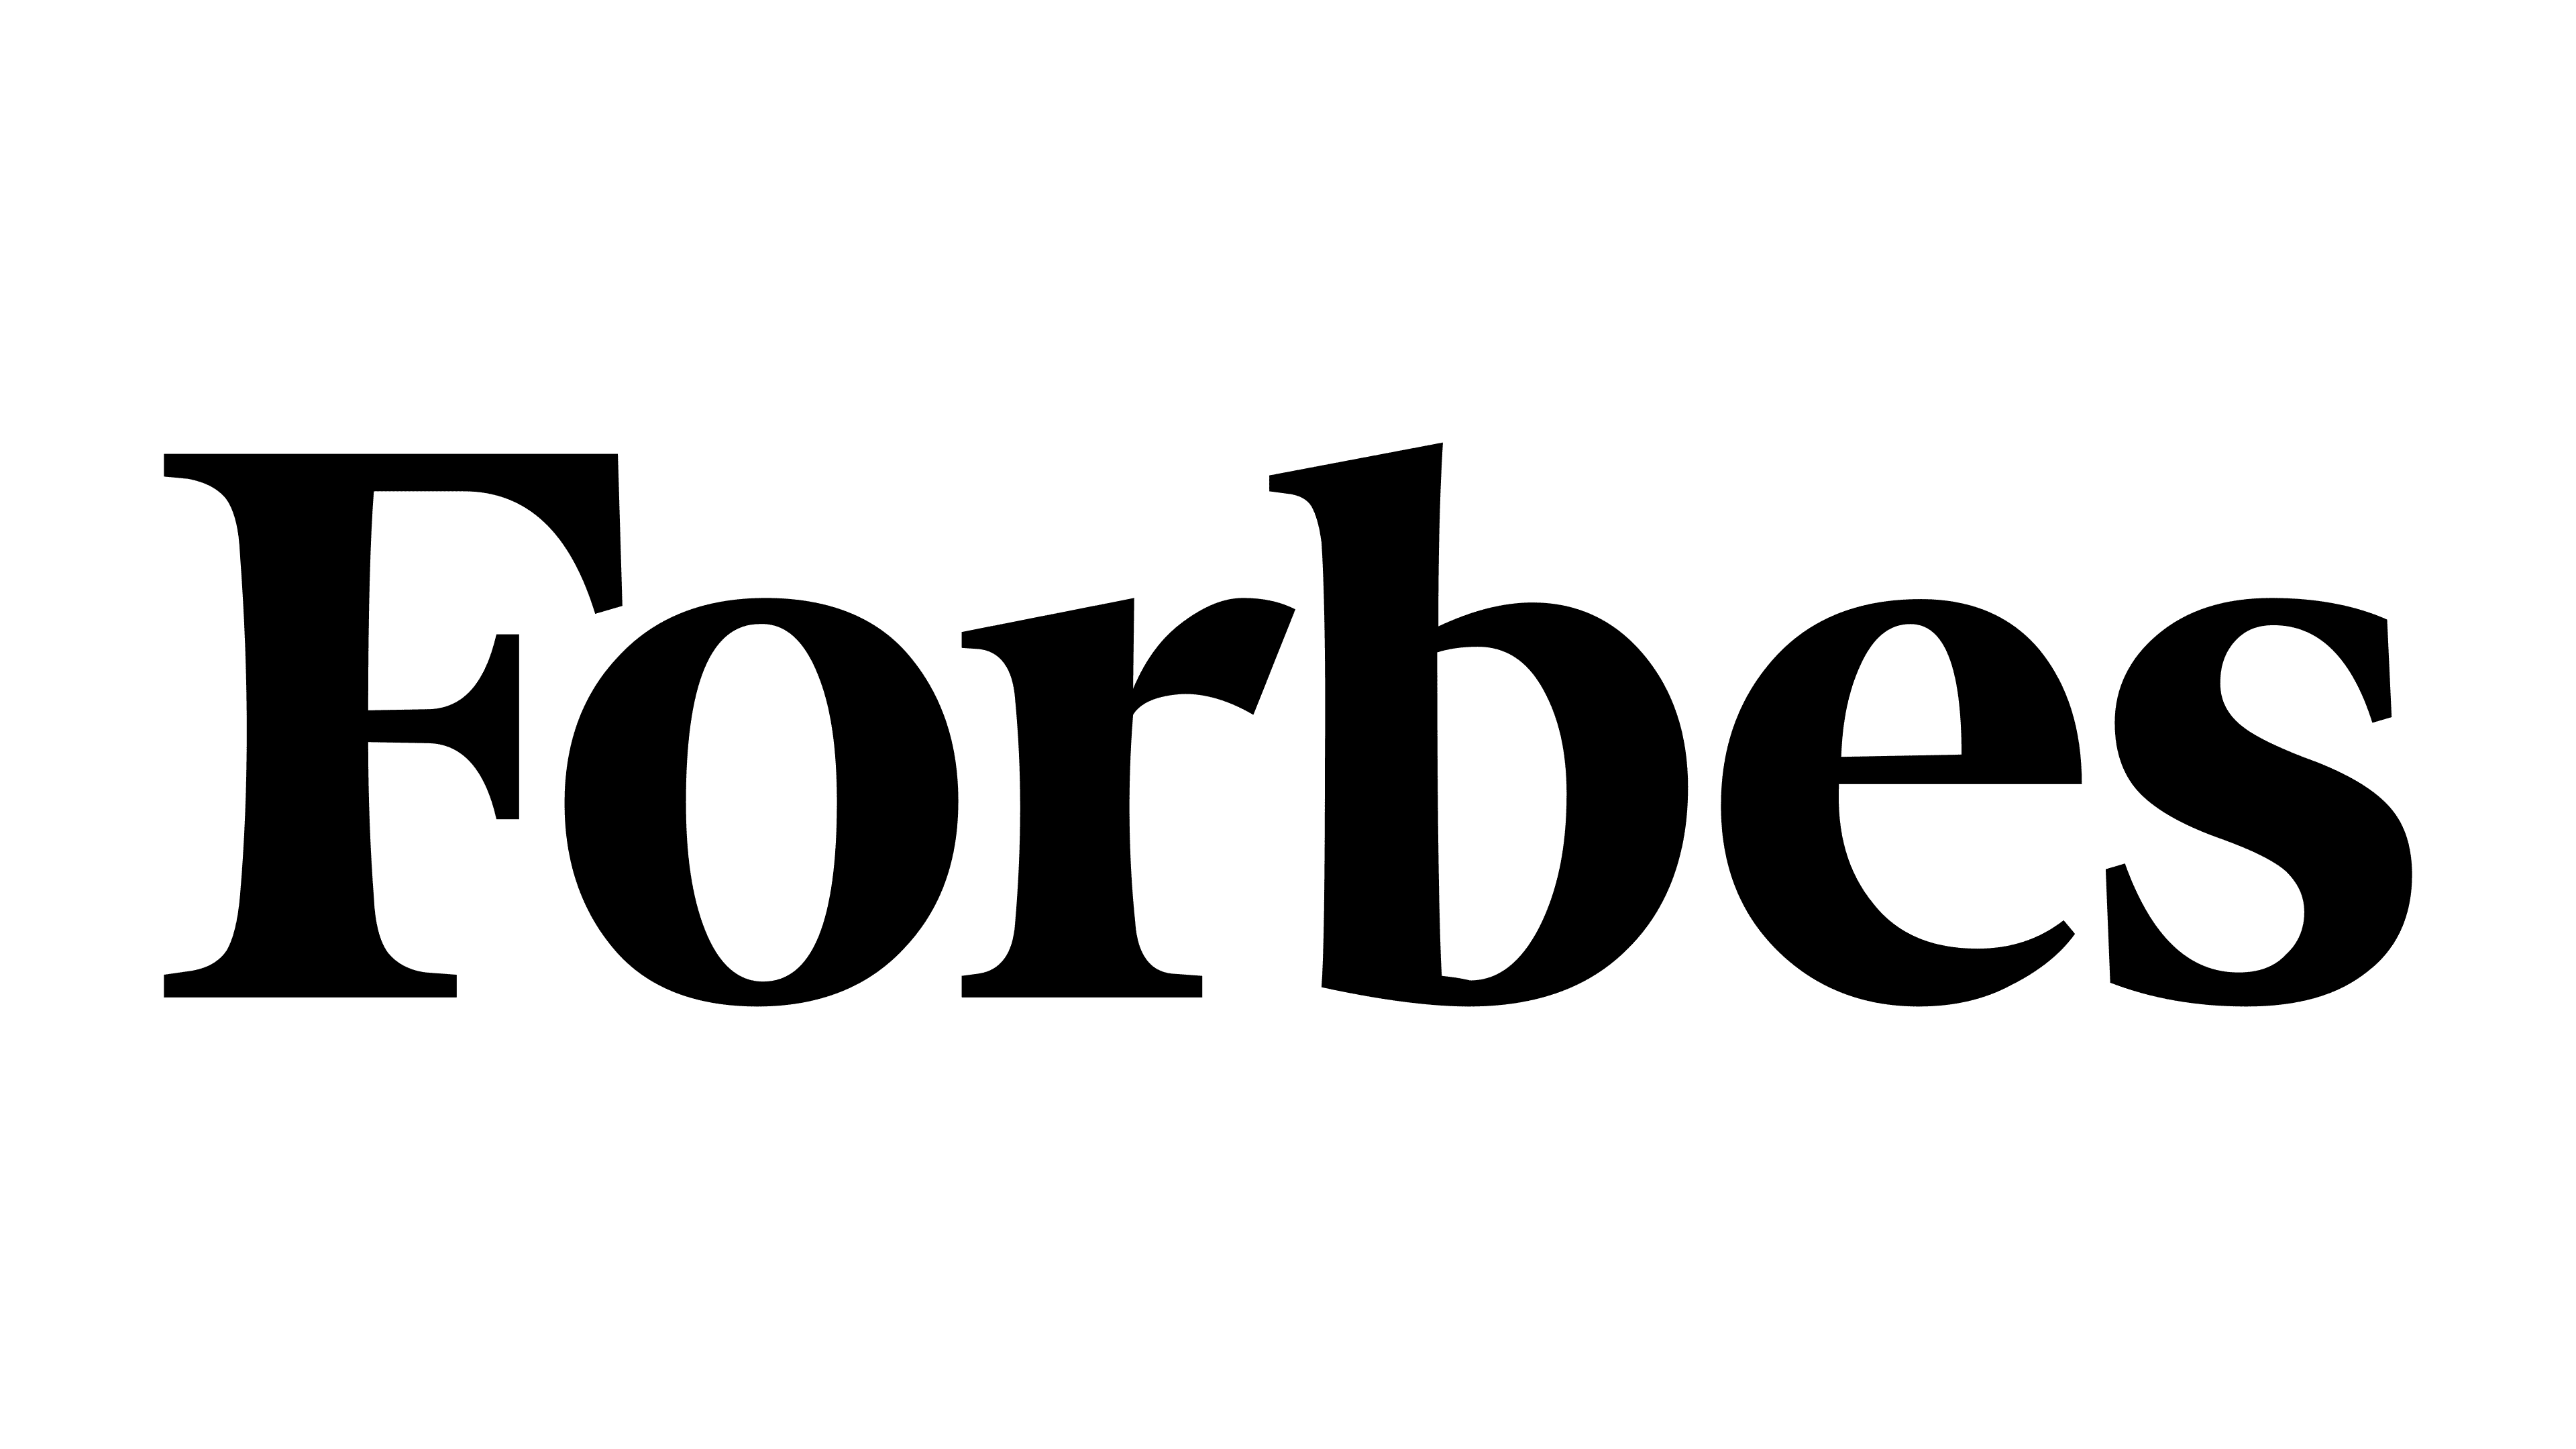 As featured in Forbes